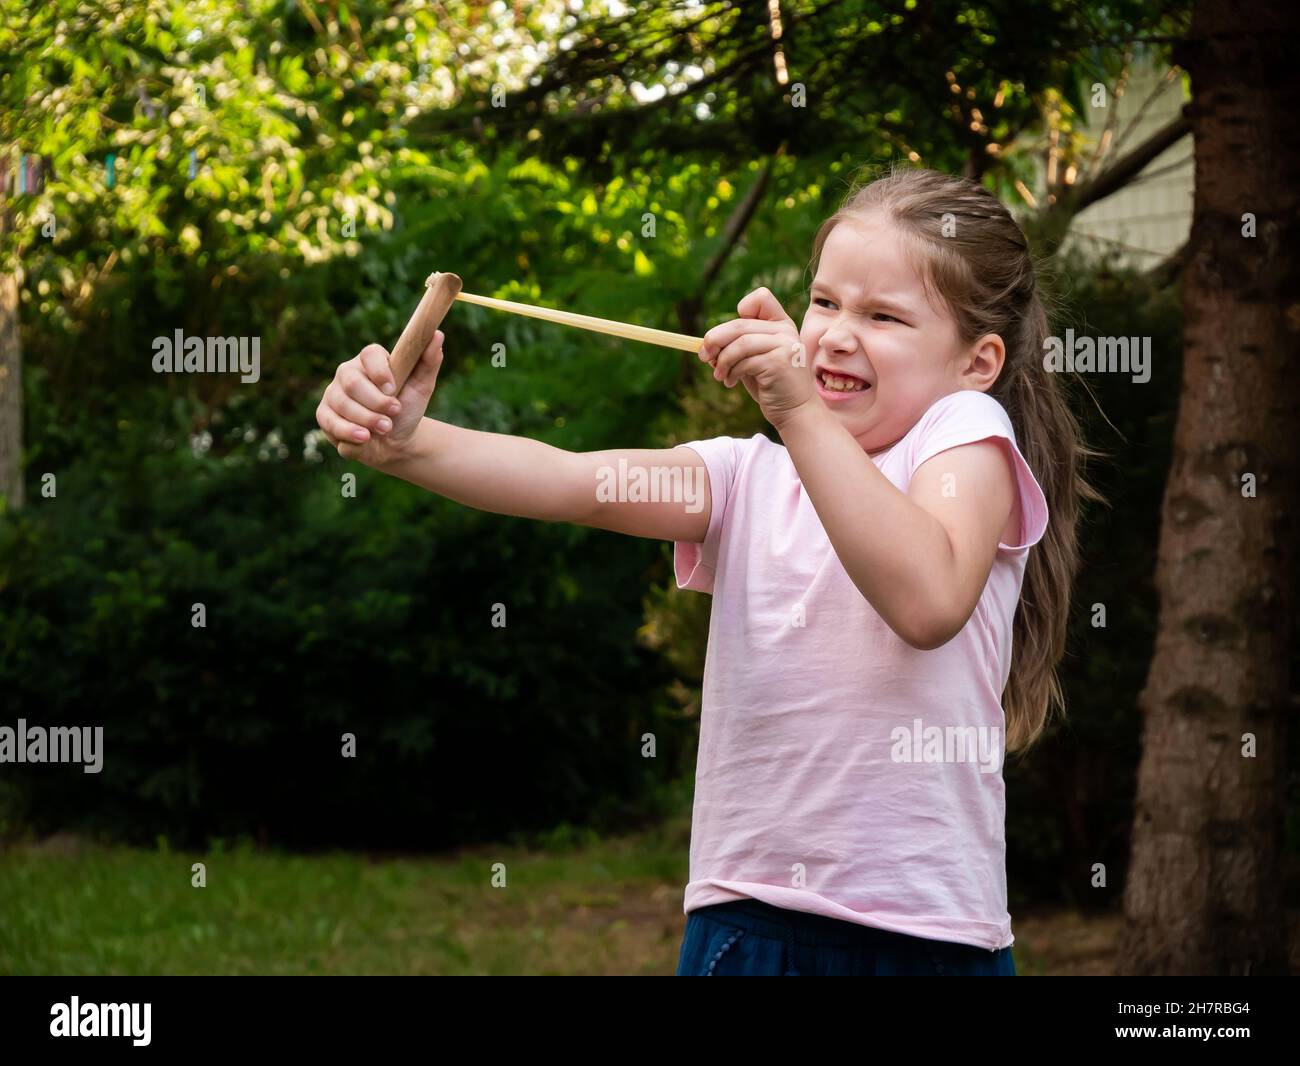 Elementary school age child, young girl pulls back a slingshot shooting, firing a rock making a funny face, outdoors. Toy weapons, tension and strengt Stock Photo